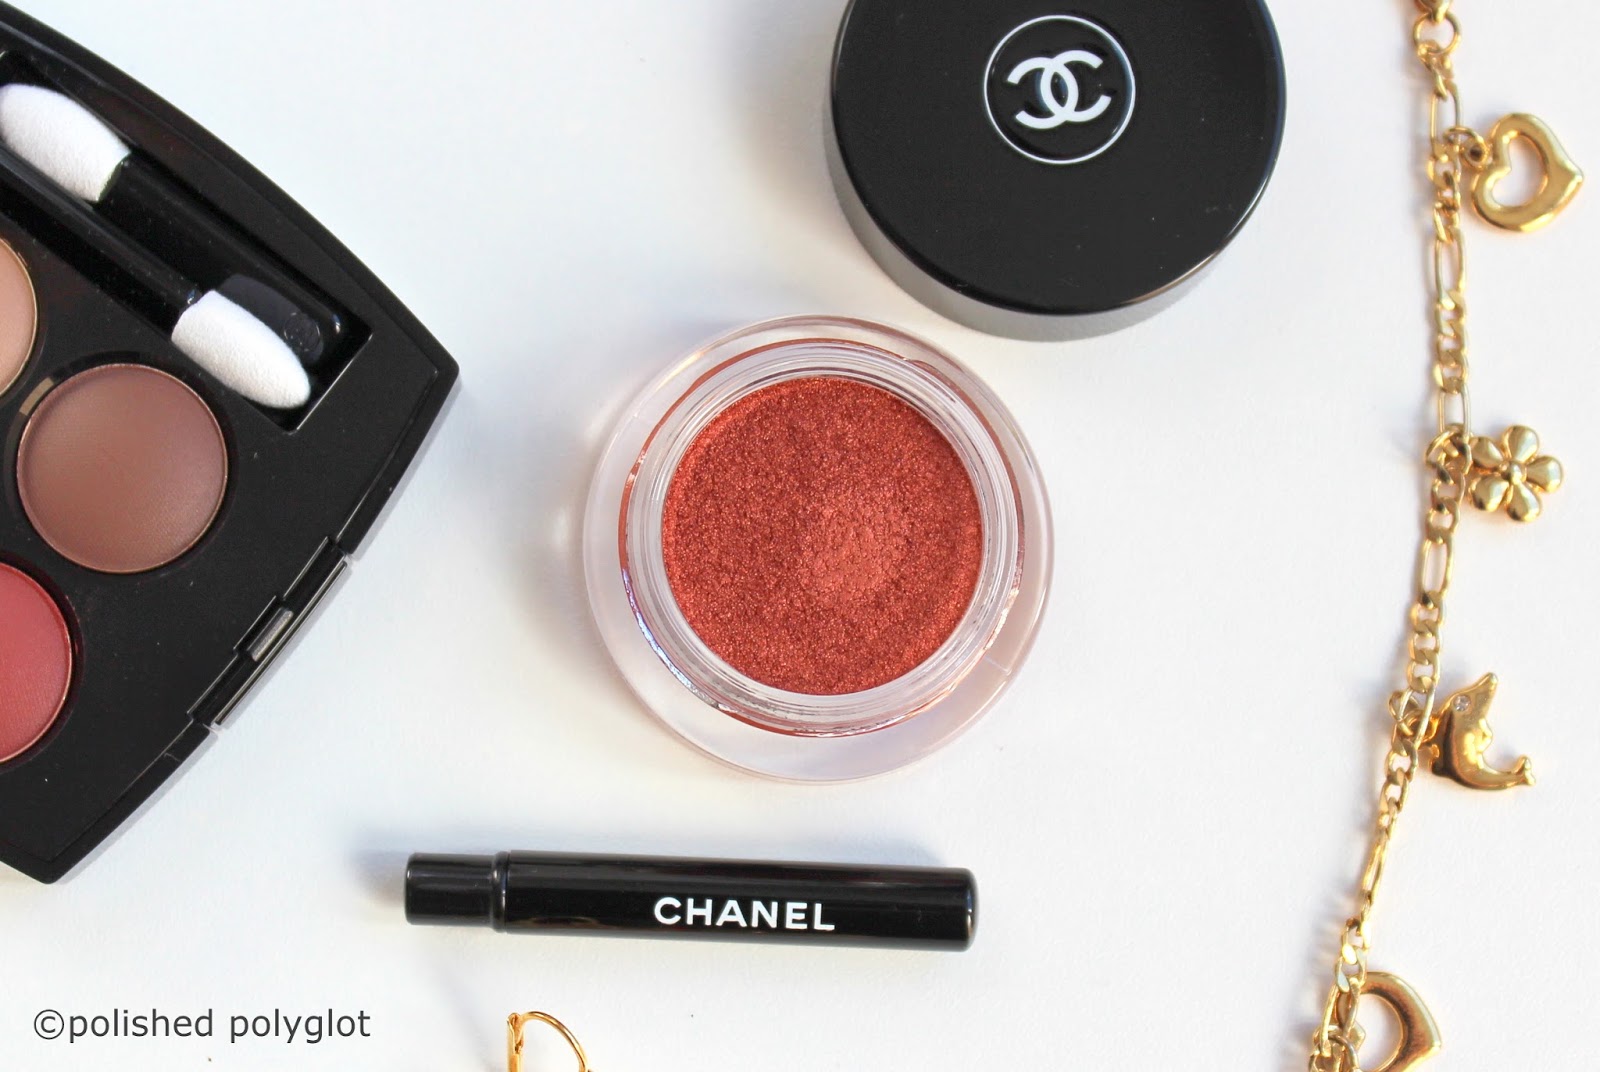 CHANEL Fall 2016 LE ROUGE COLLECTION N°1 –